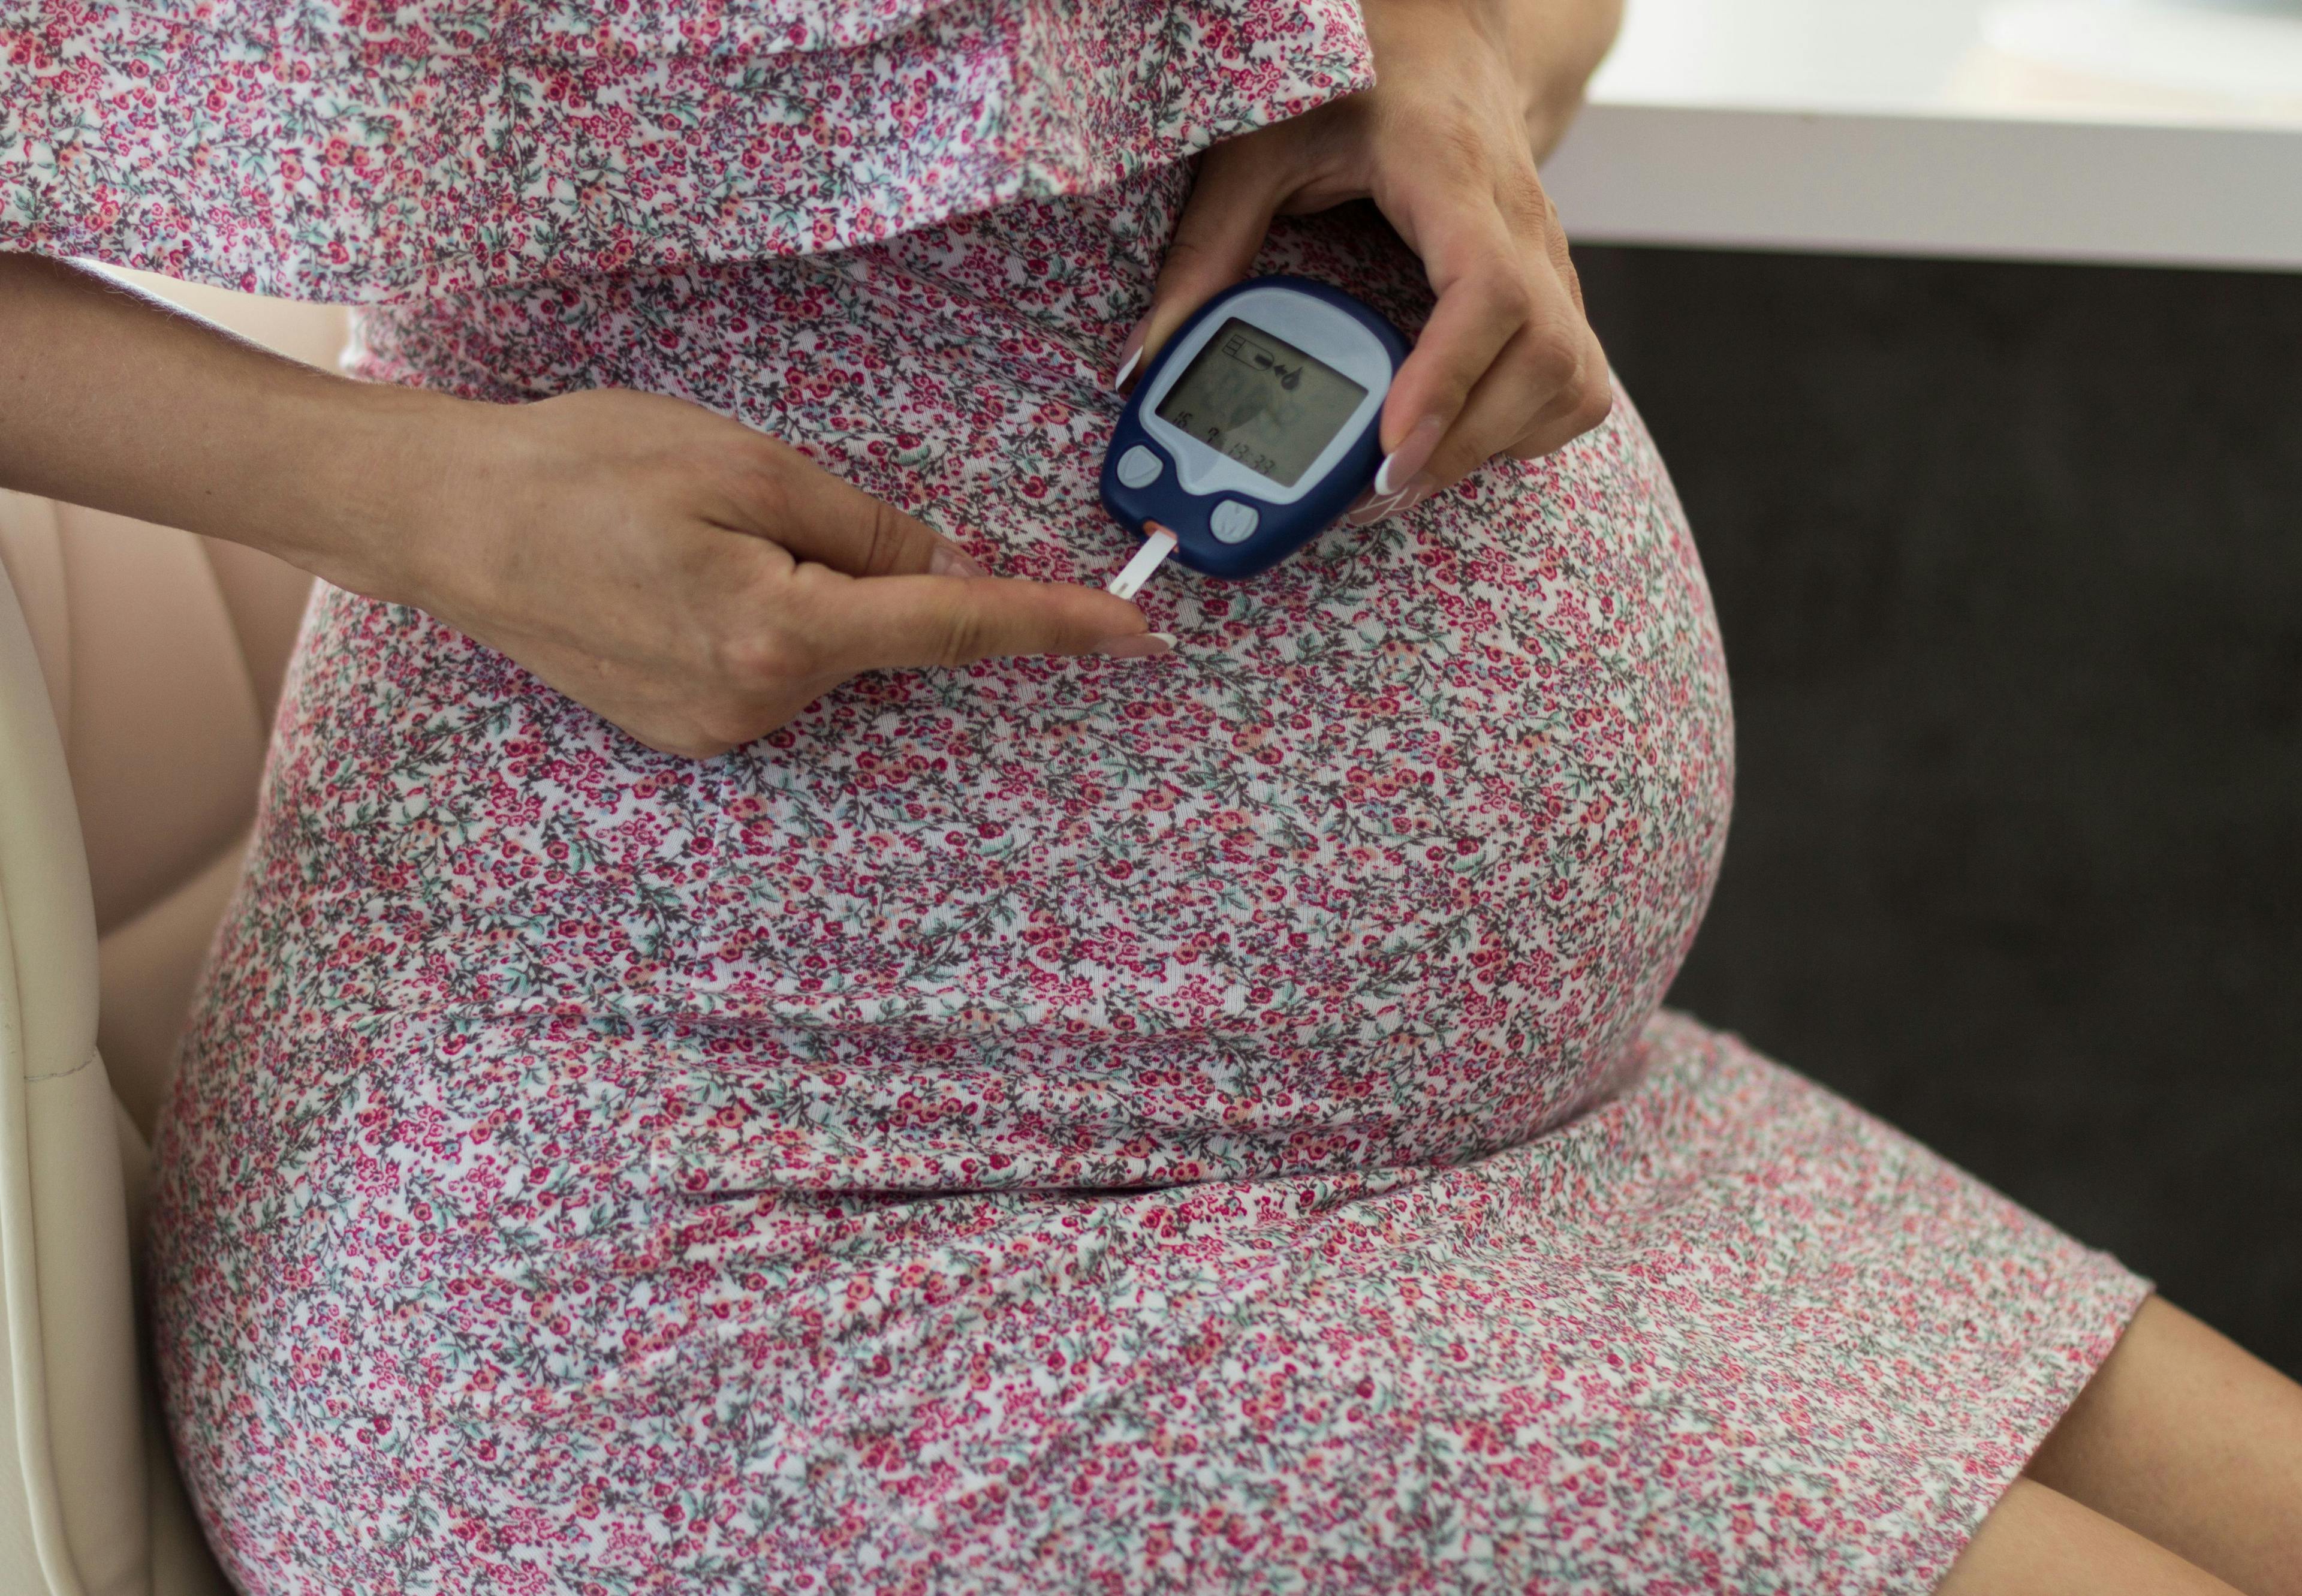 Racial and ethnic differences among women with gestational diabetes